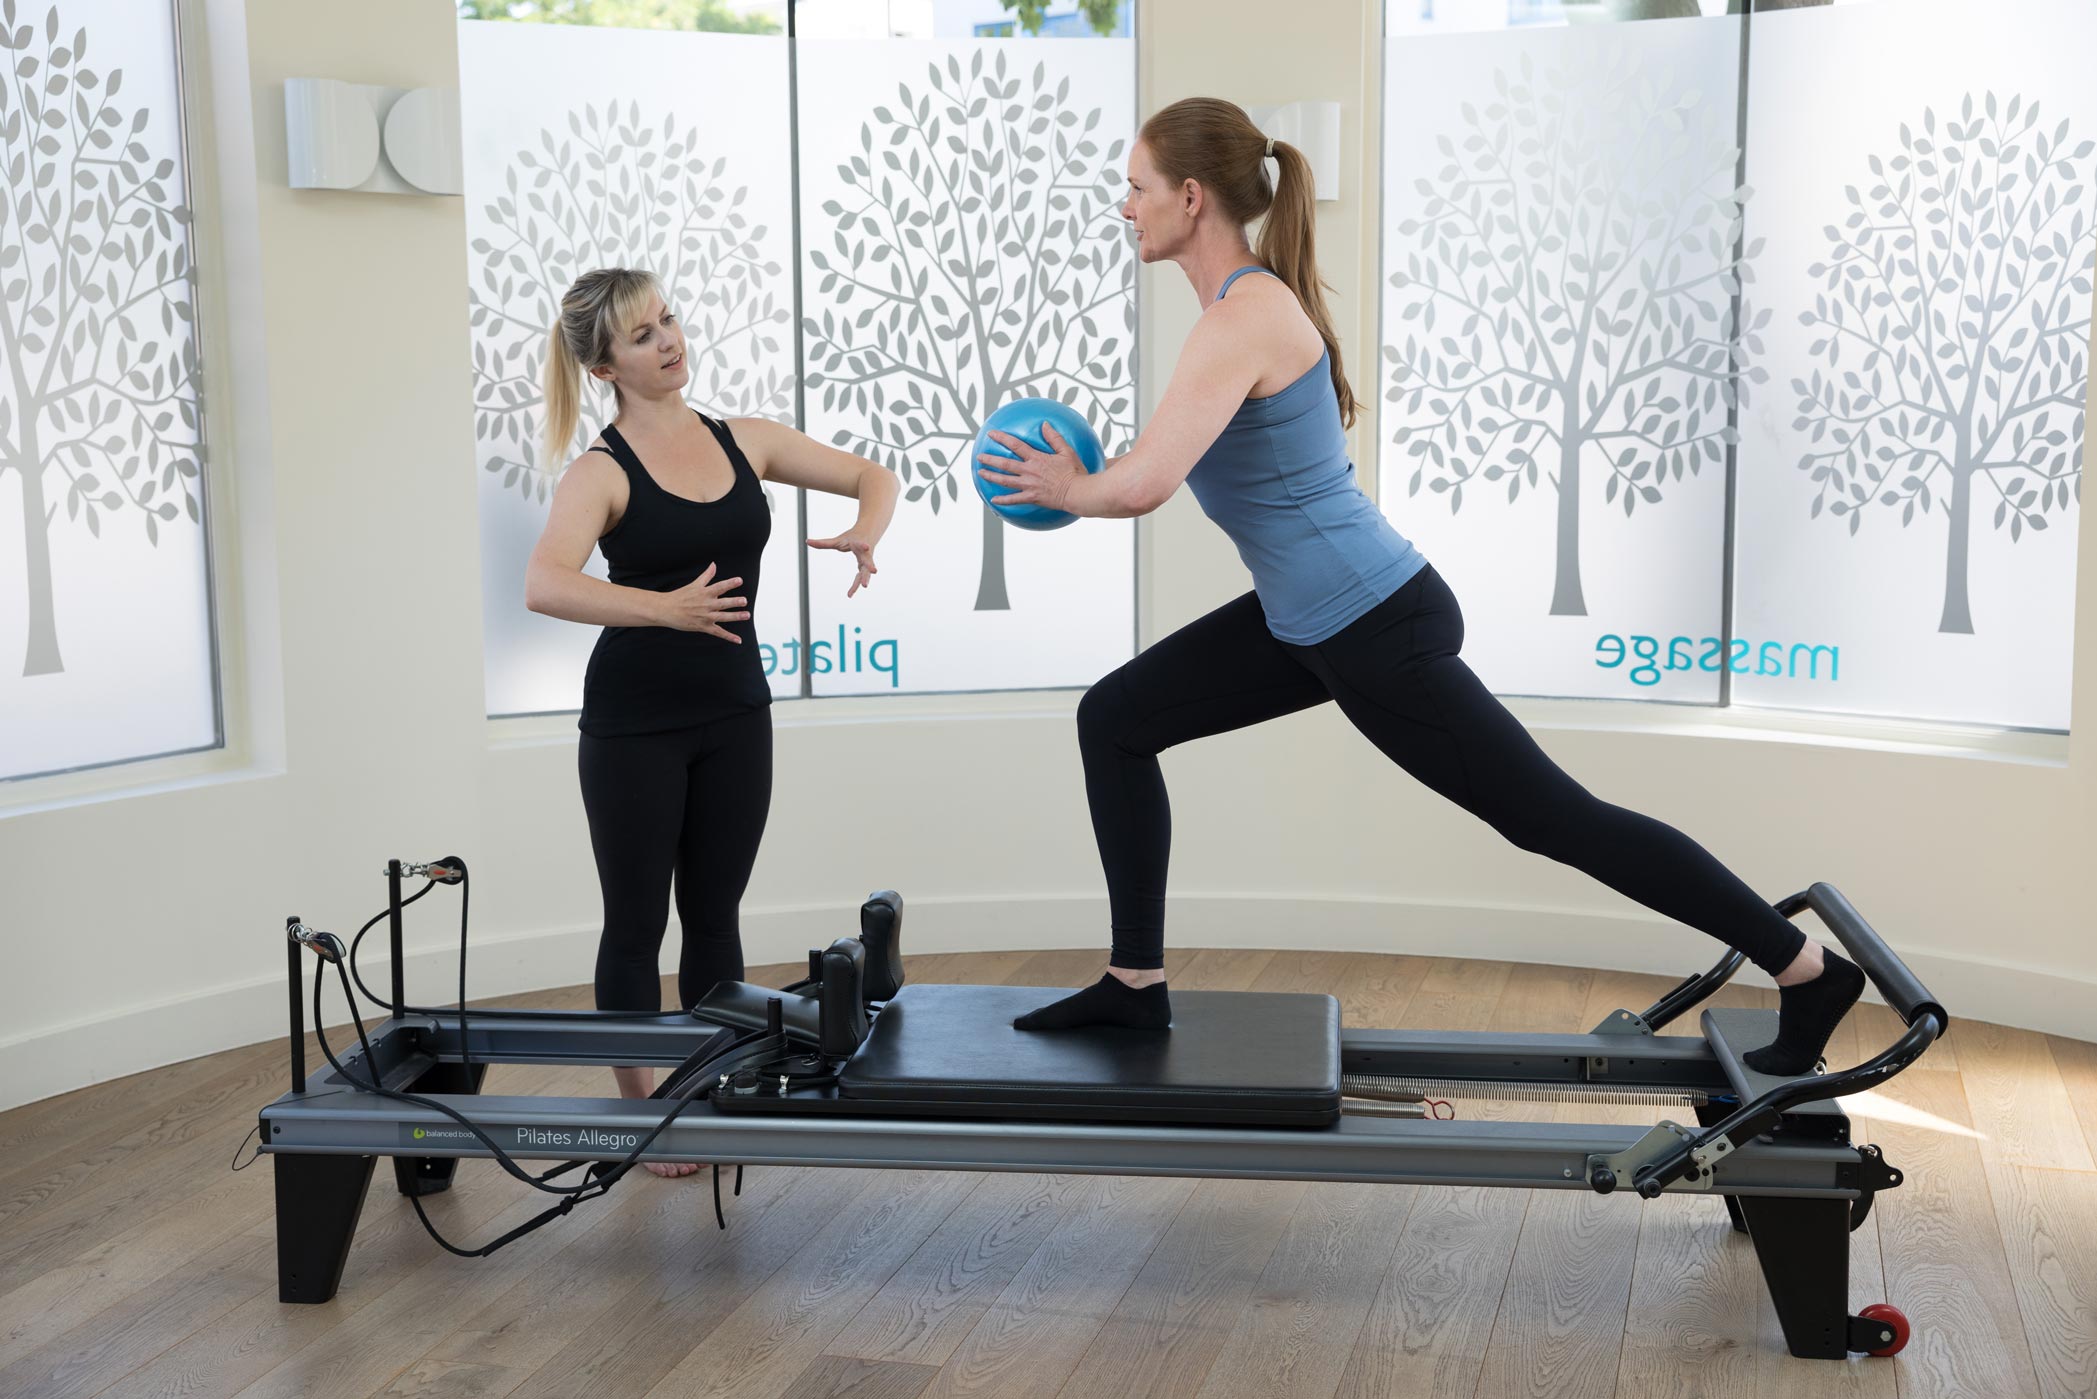 A reformer pilates class at an exercise studio in Balham, London during a health & fitness personal branding photography shoot